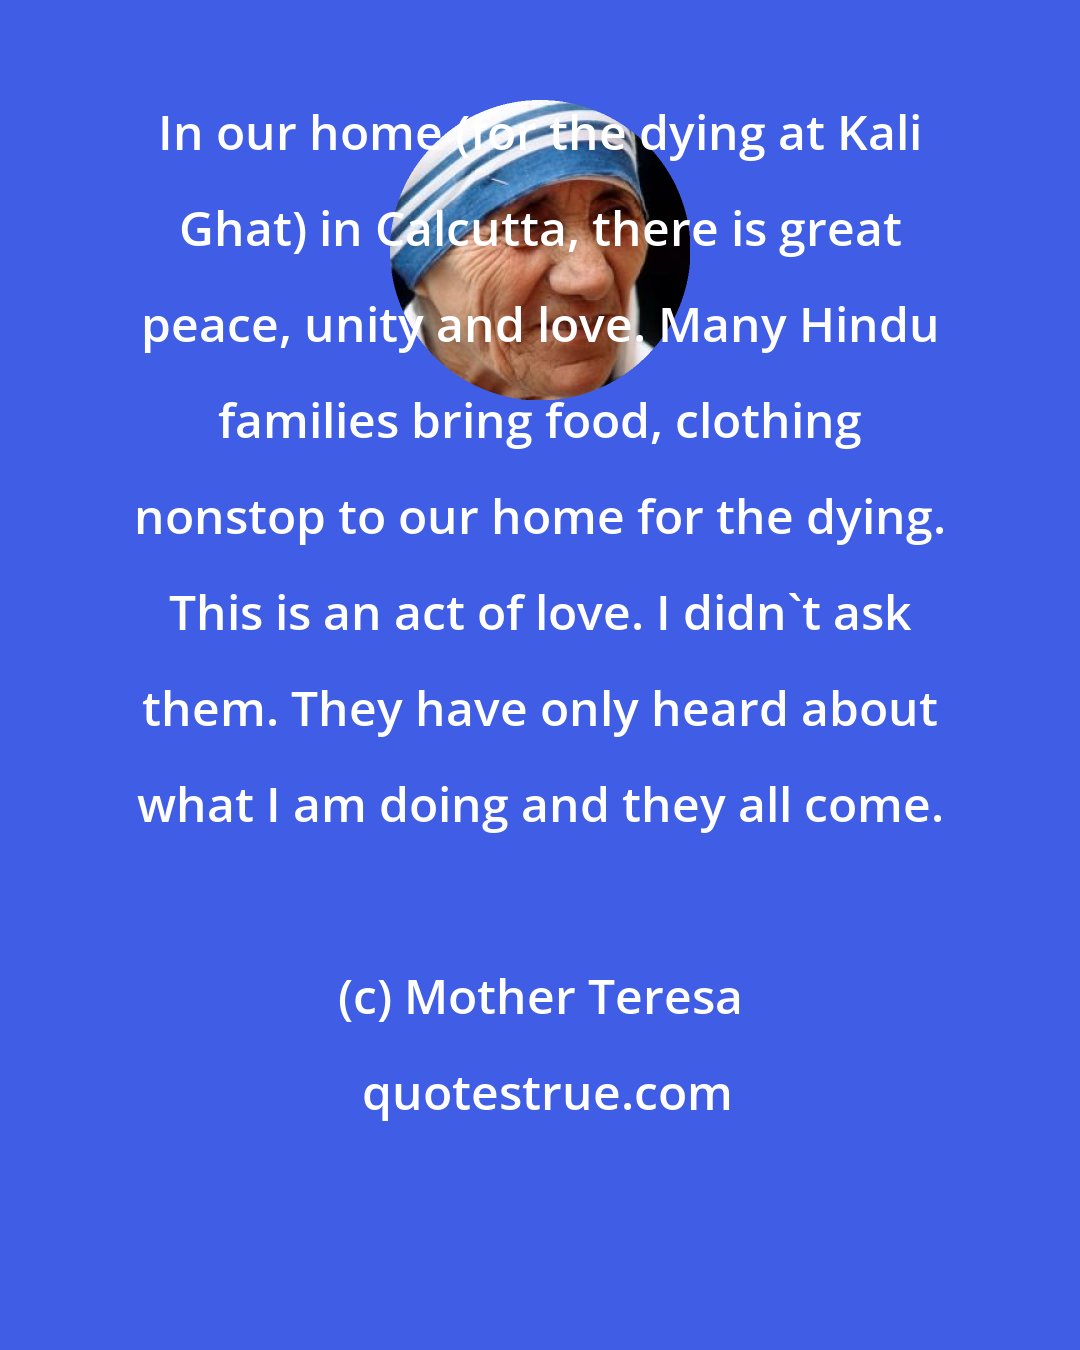 Mother Teresa: In our home (for the dying at Kali Ghat) in Calcutta, there is great peace, unity and love. Many Hindu families bring food, clothing nonstop to our home for the dying. This is an act of love. I didn't ask them. They have only heard about what I am doing and they all come.